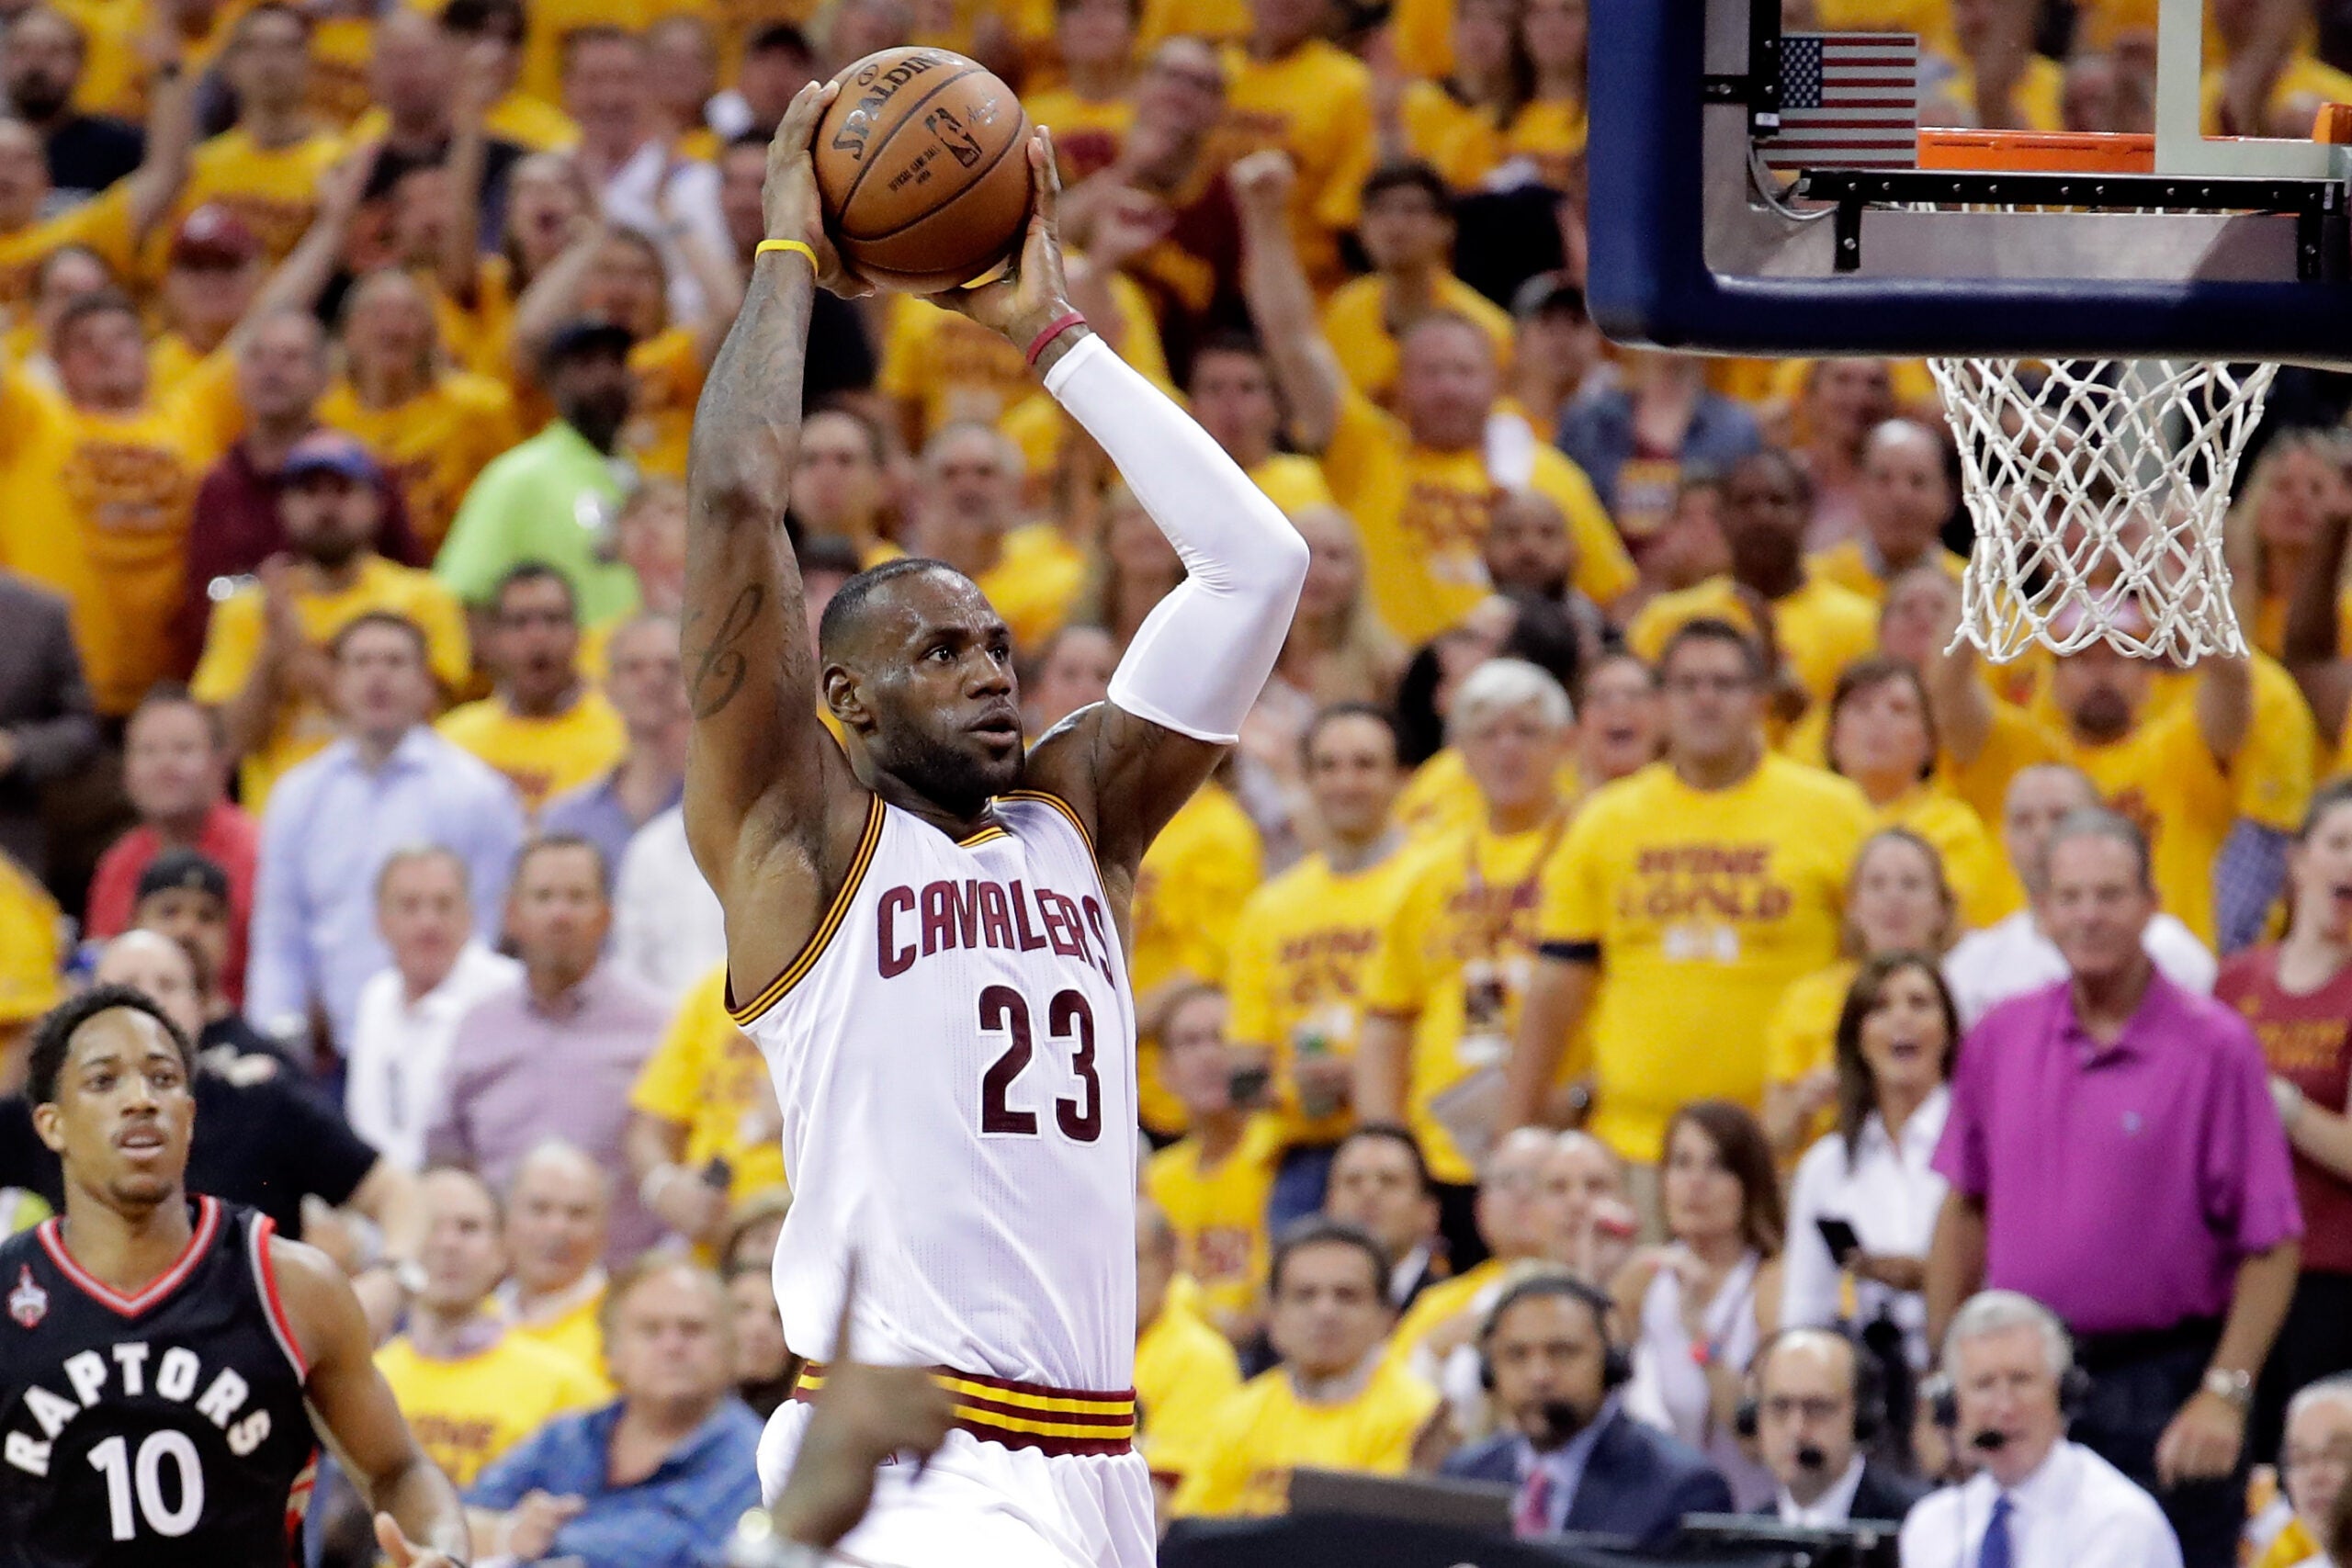 LeBron praises Cavaliers roster: Is a return to Cleveland in the